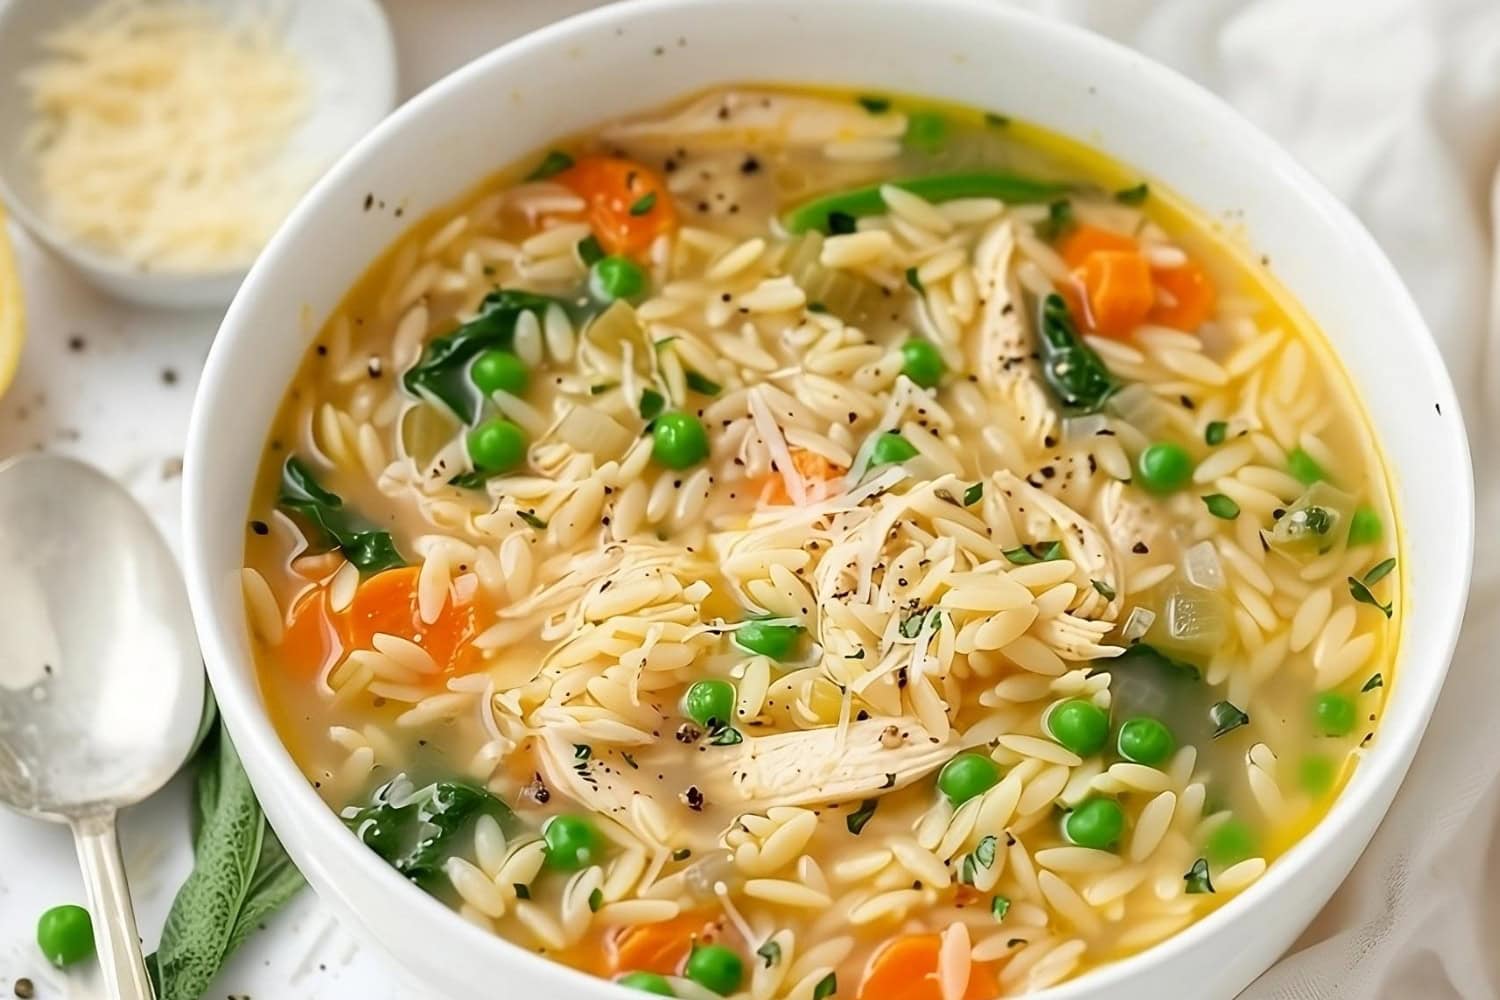 Lemon chicken orzo soup in a white bowl garnished with parmesan cheese.